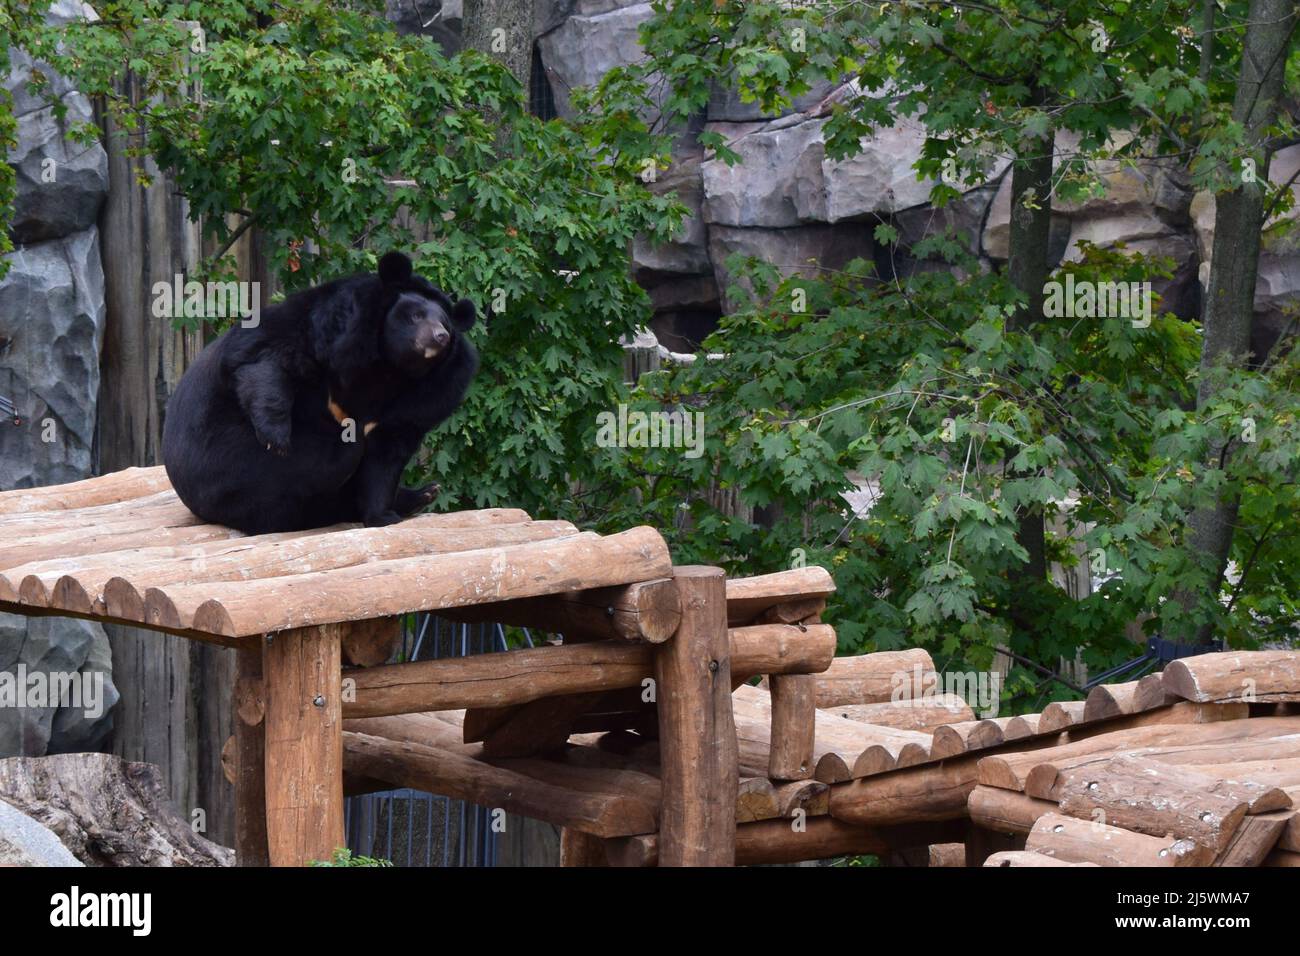 Black bear relaxed and lazy on the wooden platform in a zoo. Asian black bear (Ursus thibetanus) also known as the moon bear and the white-chested bea Stock Photo